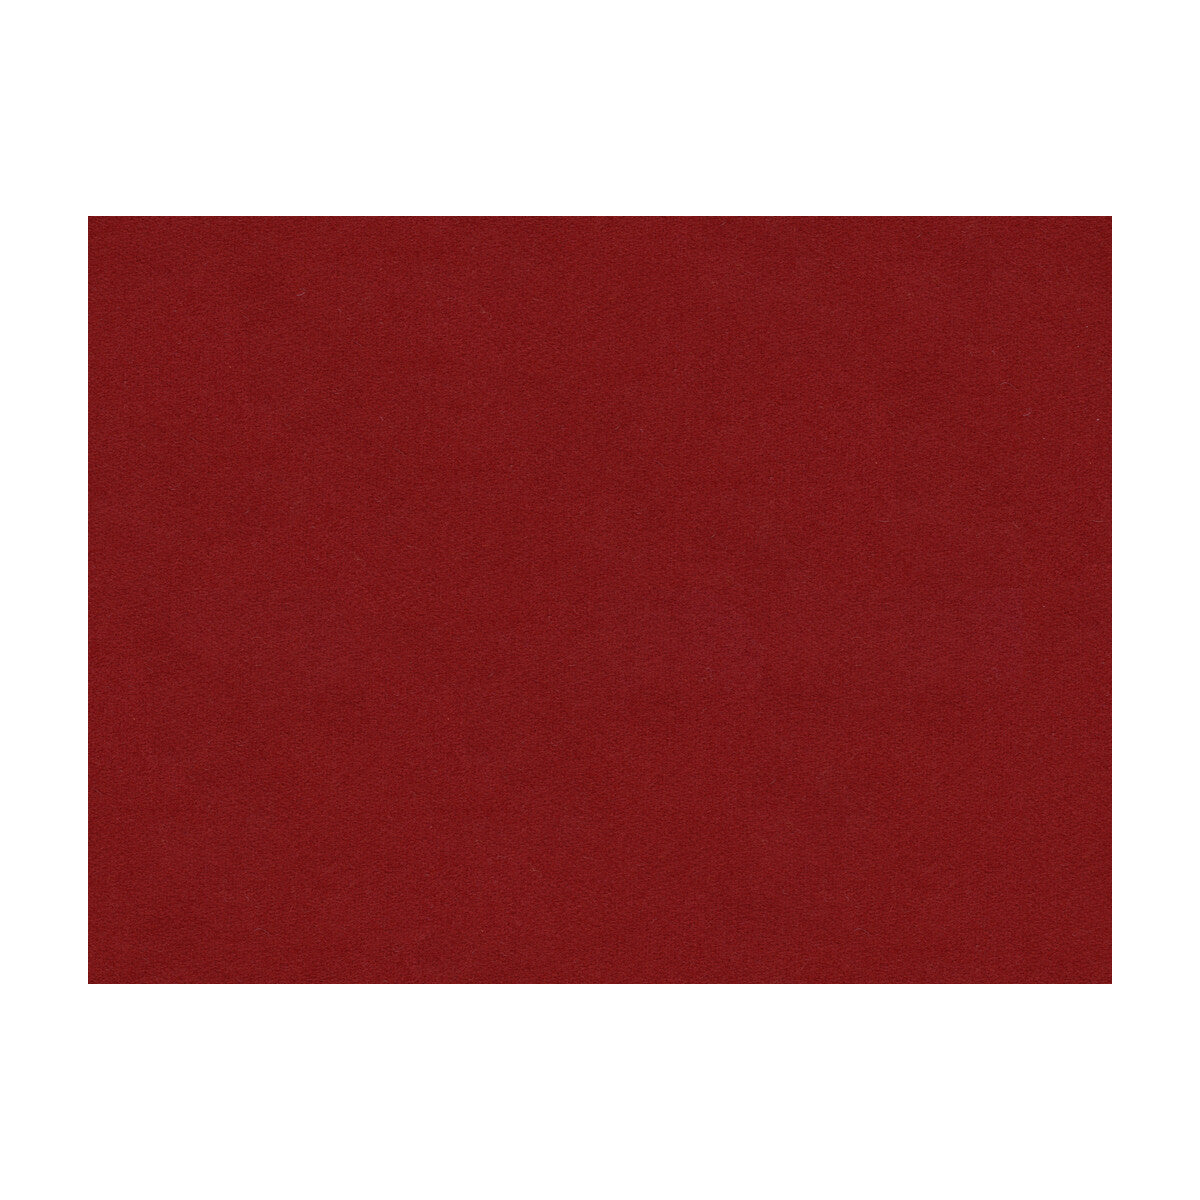 Chevalier Wool fabric in pomegranate color - pattern 8013149.919.0 - by Brunschwig &amp; Fils